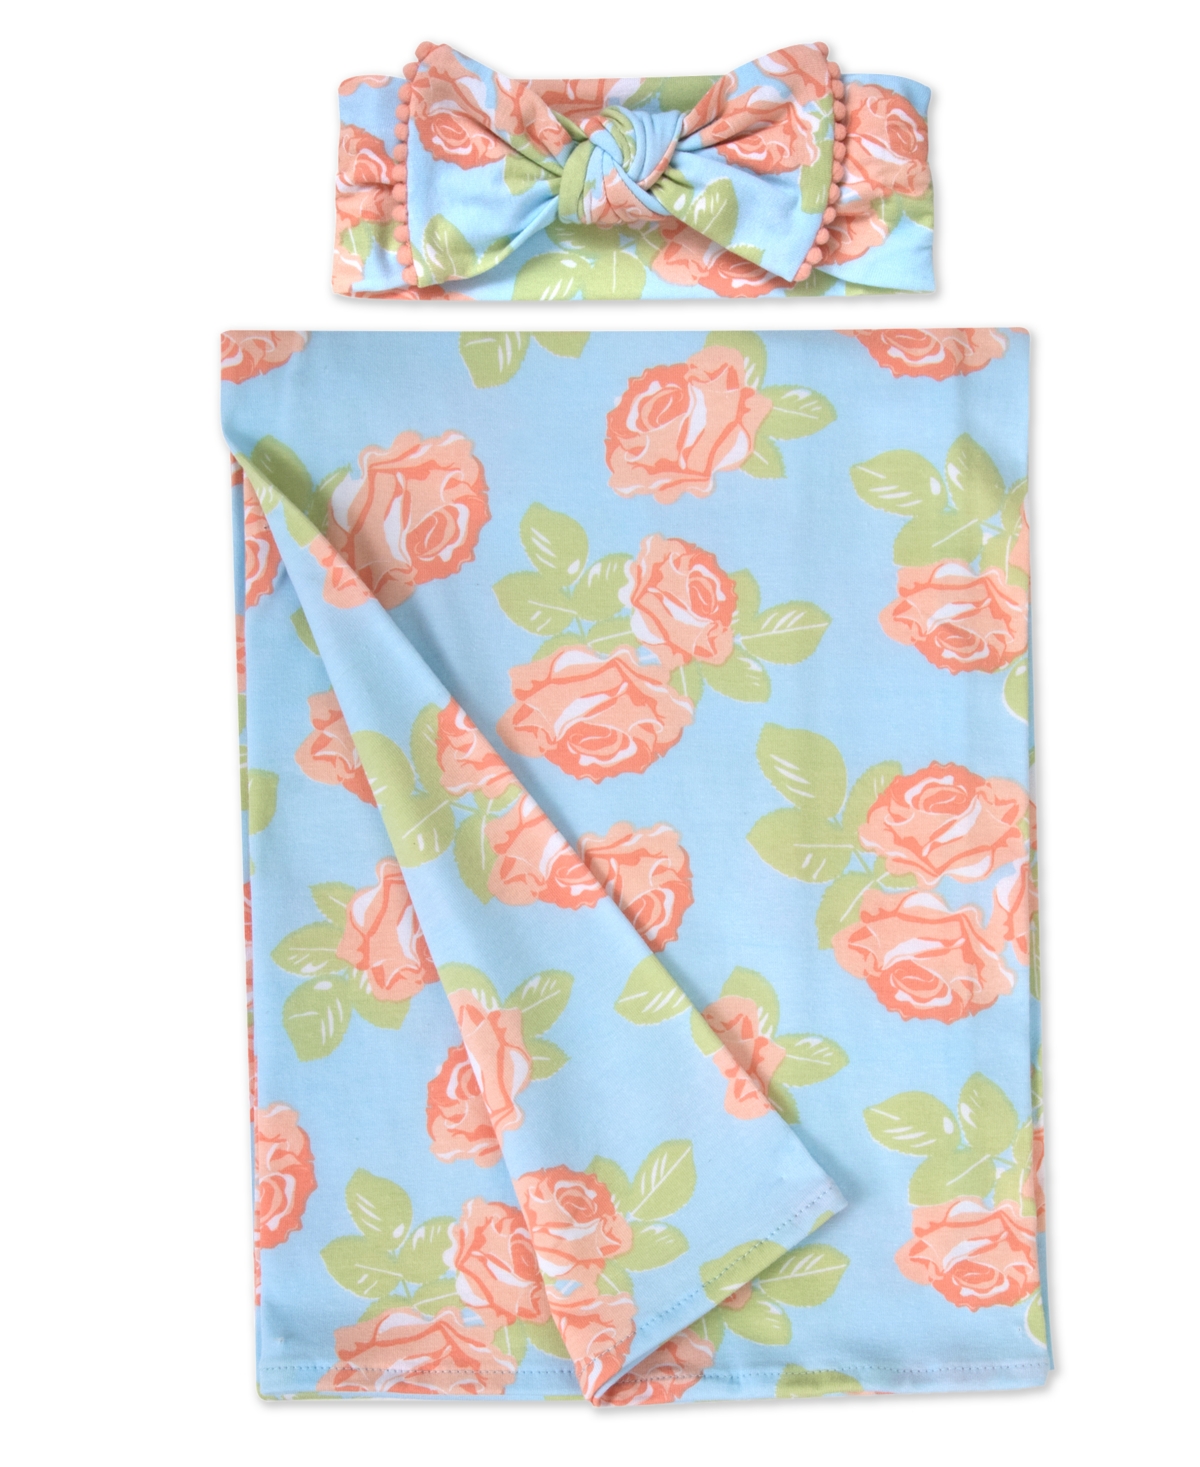 Baby Essentials Baby Girls Soft Floral Swaddle Wrap Blanket With Matching Headband, 2 Piece Set In Aqua